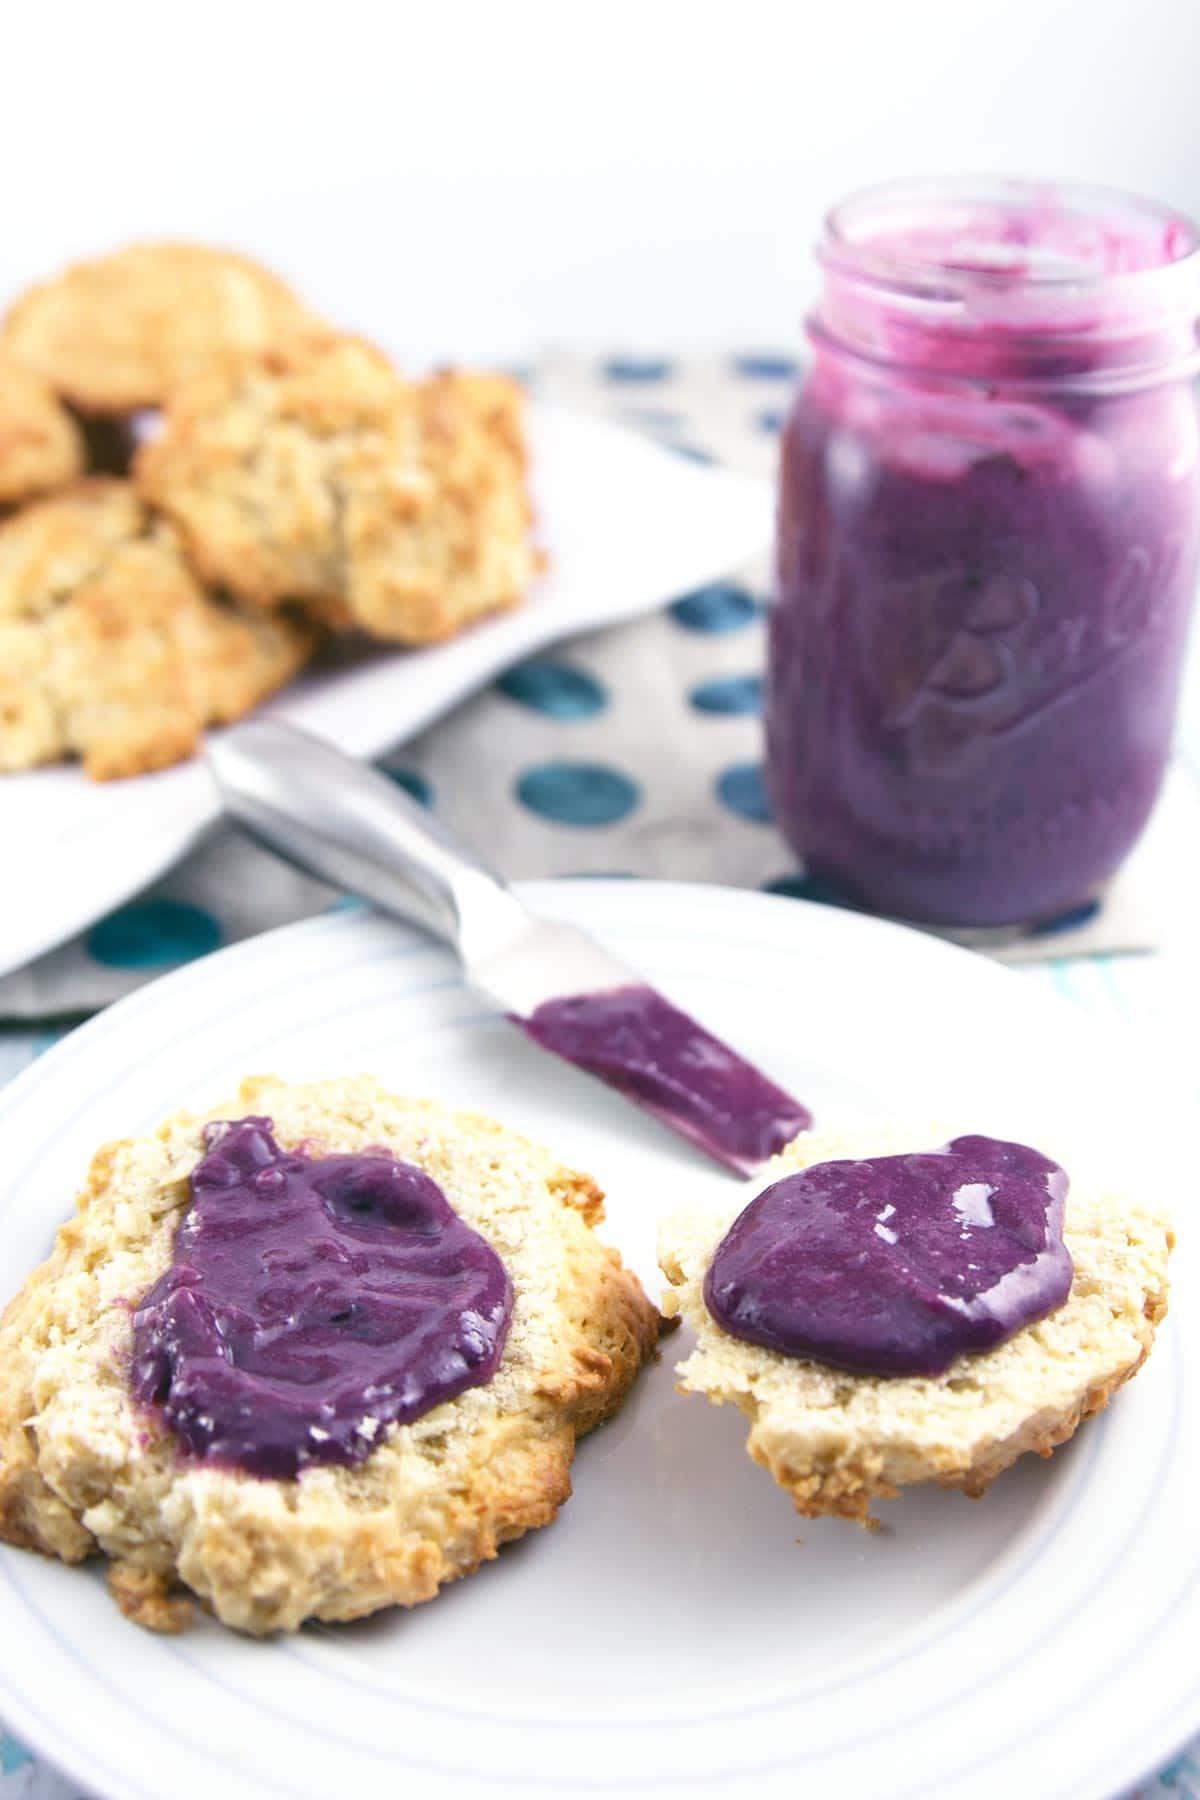 Smooth, rich curd, bursting with blueberry and cardamom flavor. Perfect for scones, muffins, cakes, tarts, or just eating right off a spoon. {Bunsen Burner Bakery}